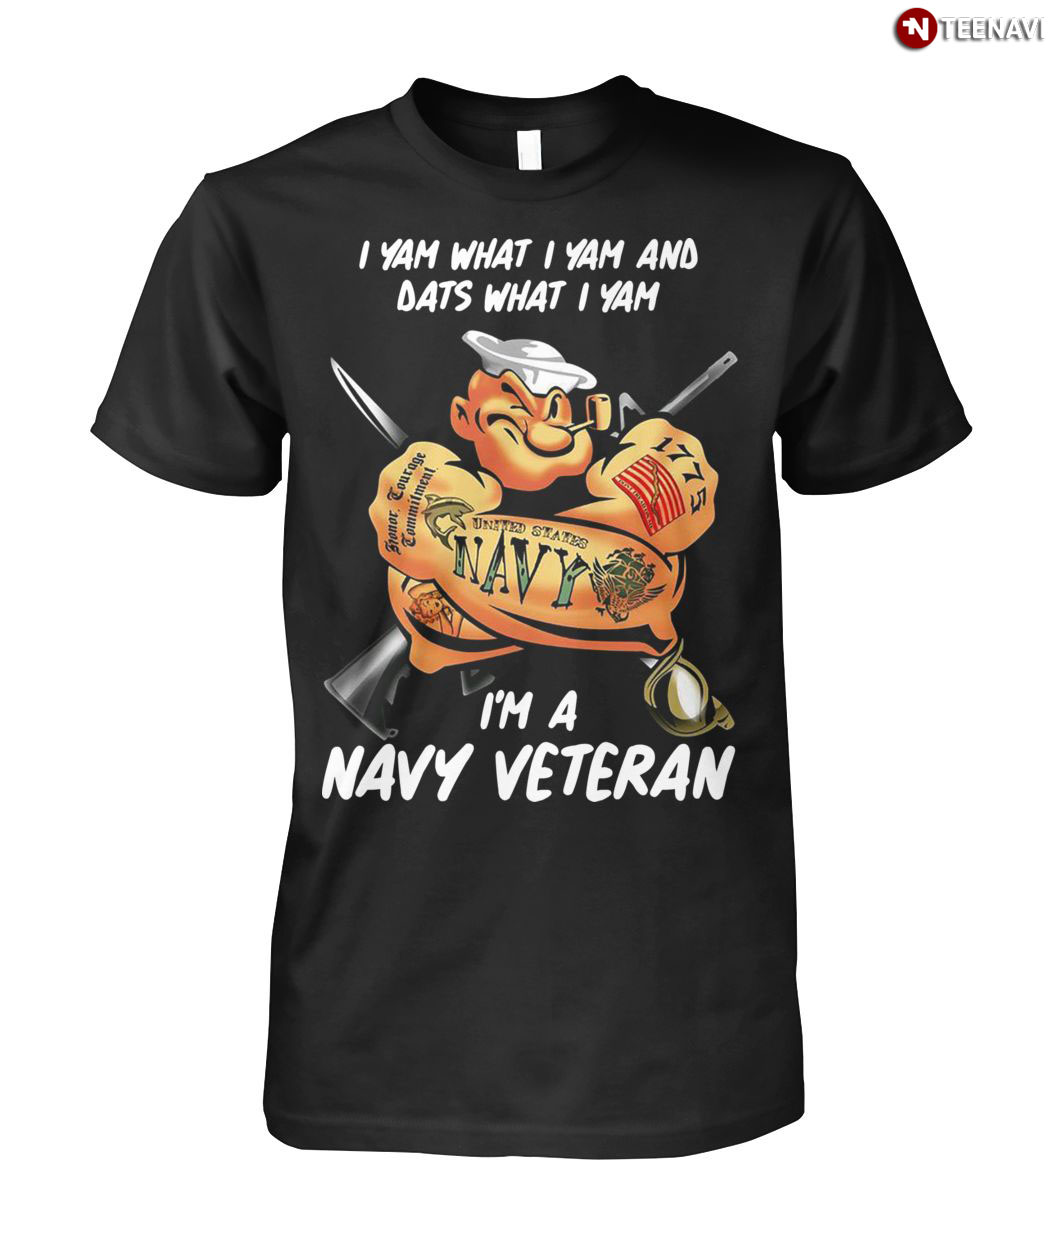 Popeye The Sailor I Yam What I Yam And Dats What I Yam I'm A Navy Veteran